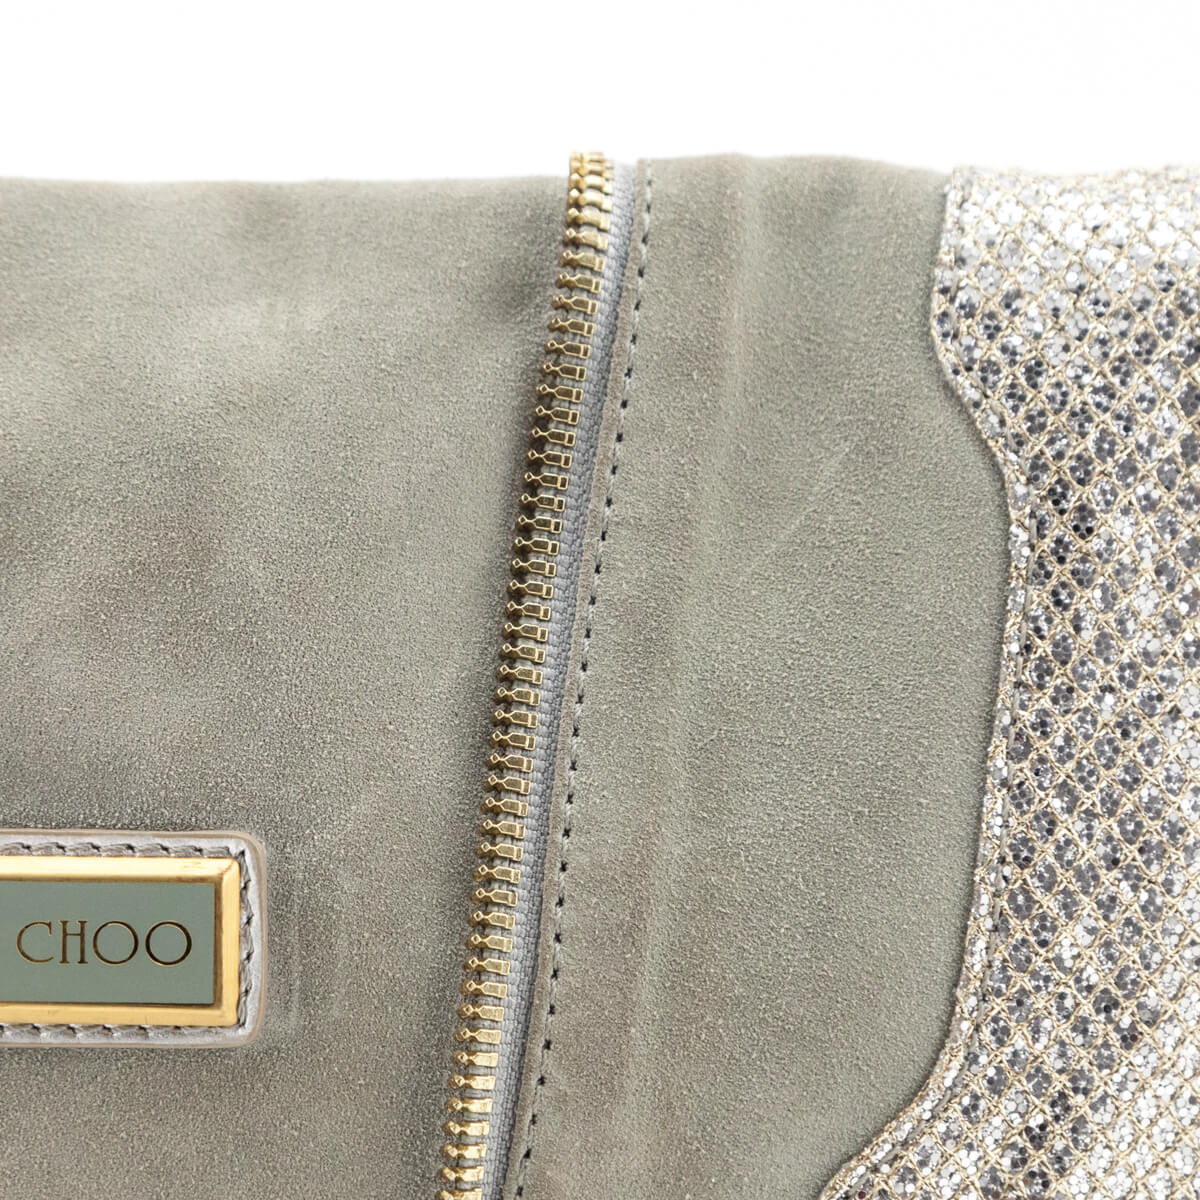 Jimmy Choo Gray Suede & Silver Glitter Zip Embellished Convertible Clutch - Love that Bag etc - Preowned Authentic Designer Handbags & Preloved Fashions